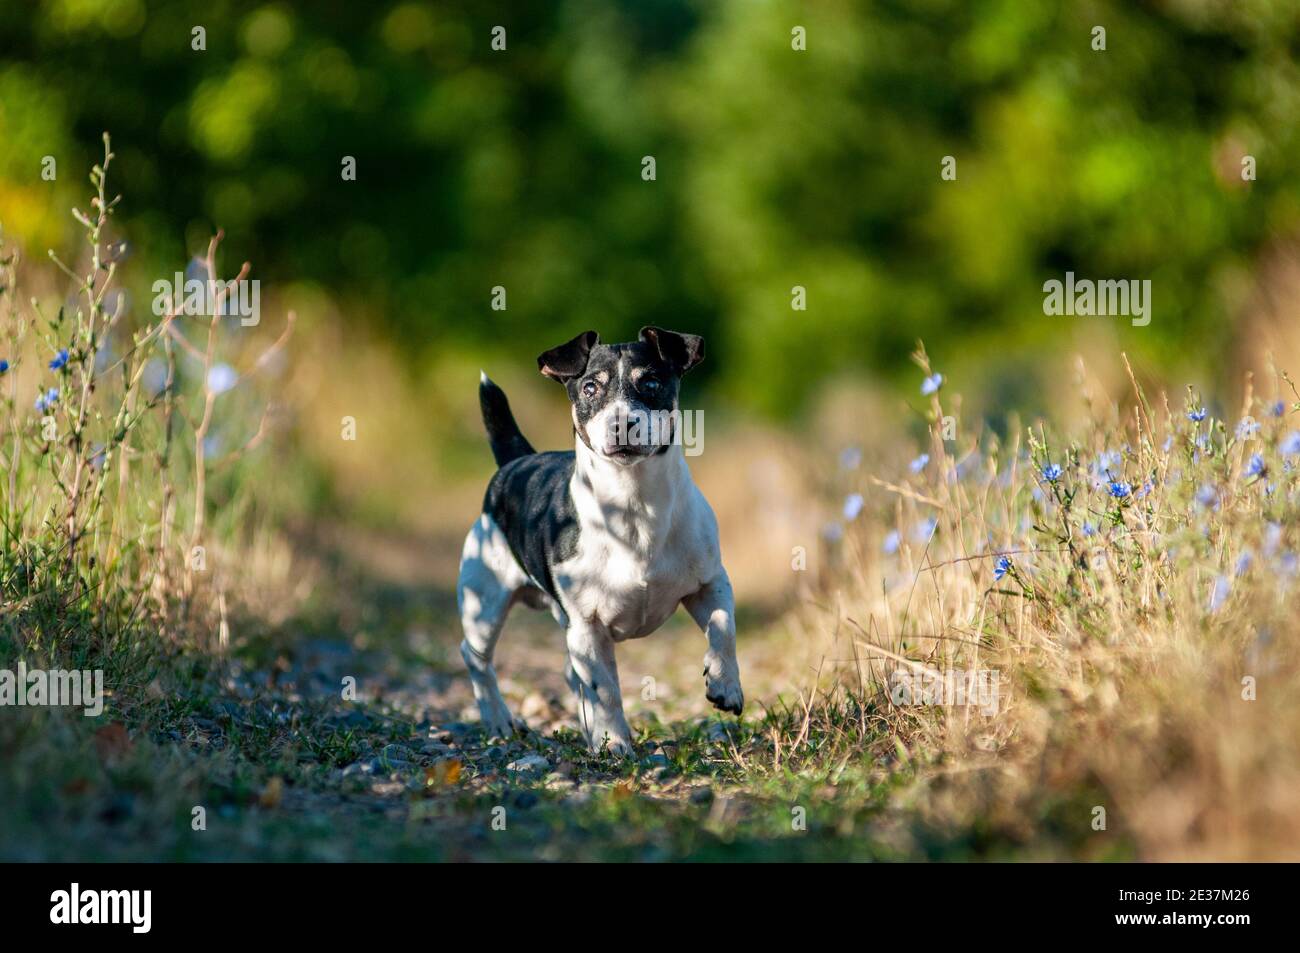 Old tricolor Jack Russell Terrier in a natural environment. The dog is blind and has a serious expression Stock Photo